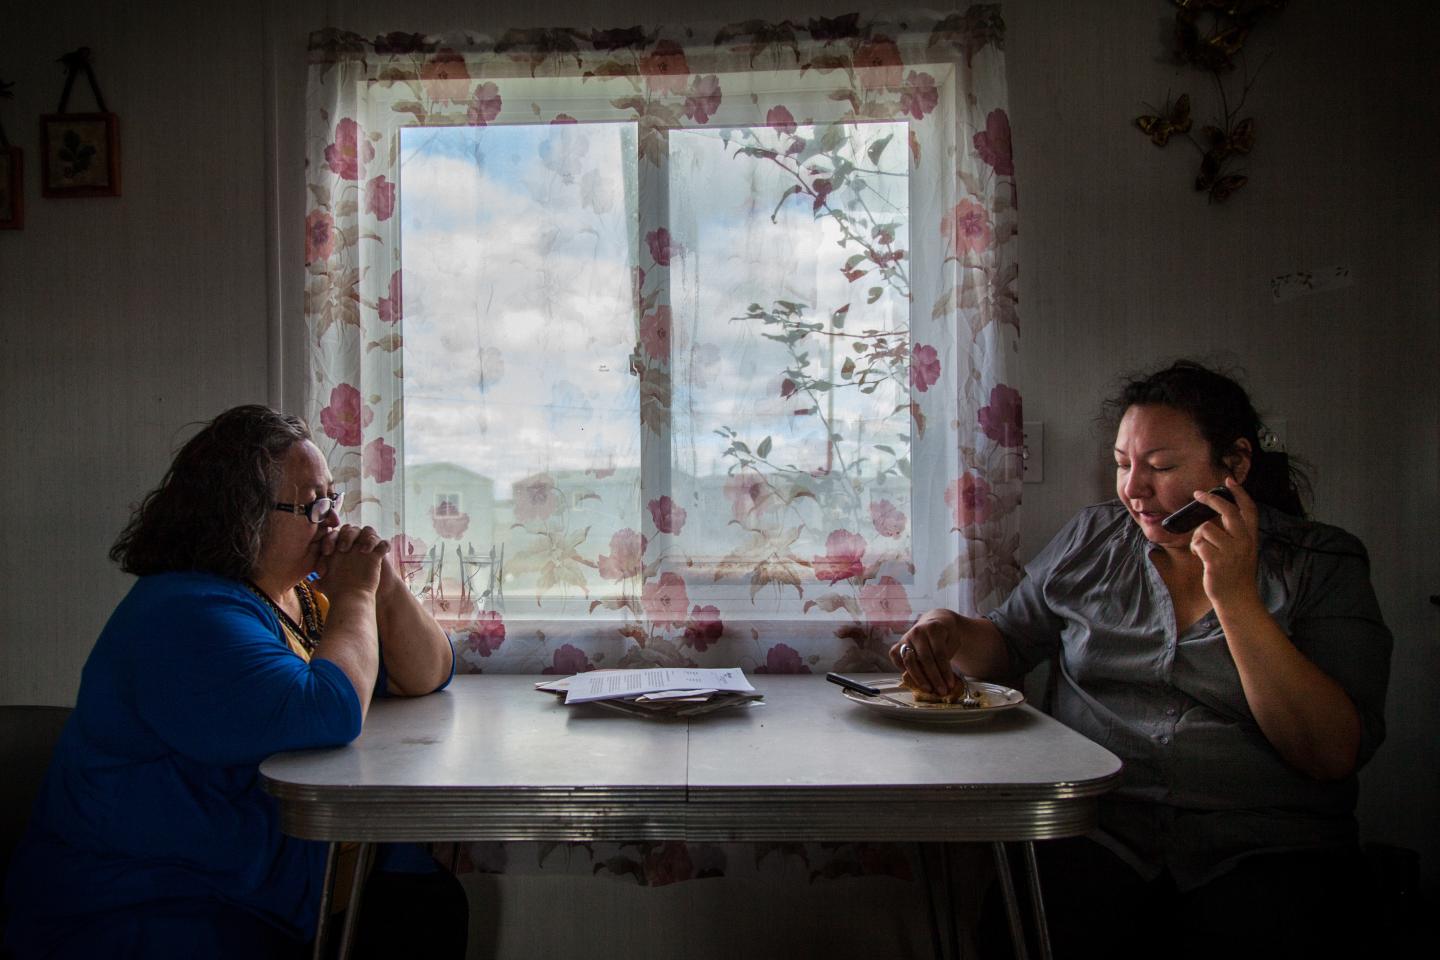 Two Indigenous people sit at a table in front of a window. The person on the right is eating and talking on speaker phone.